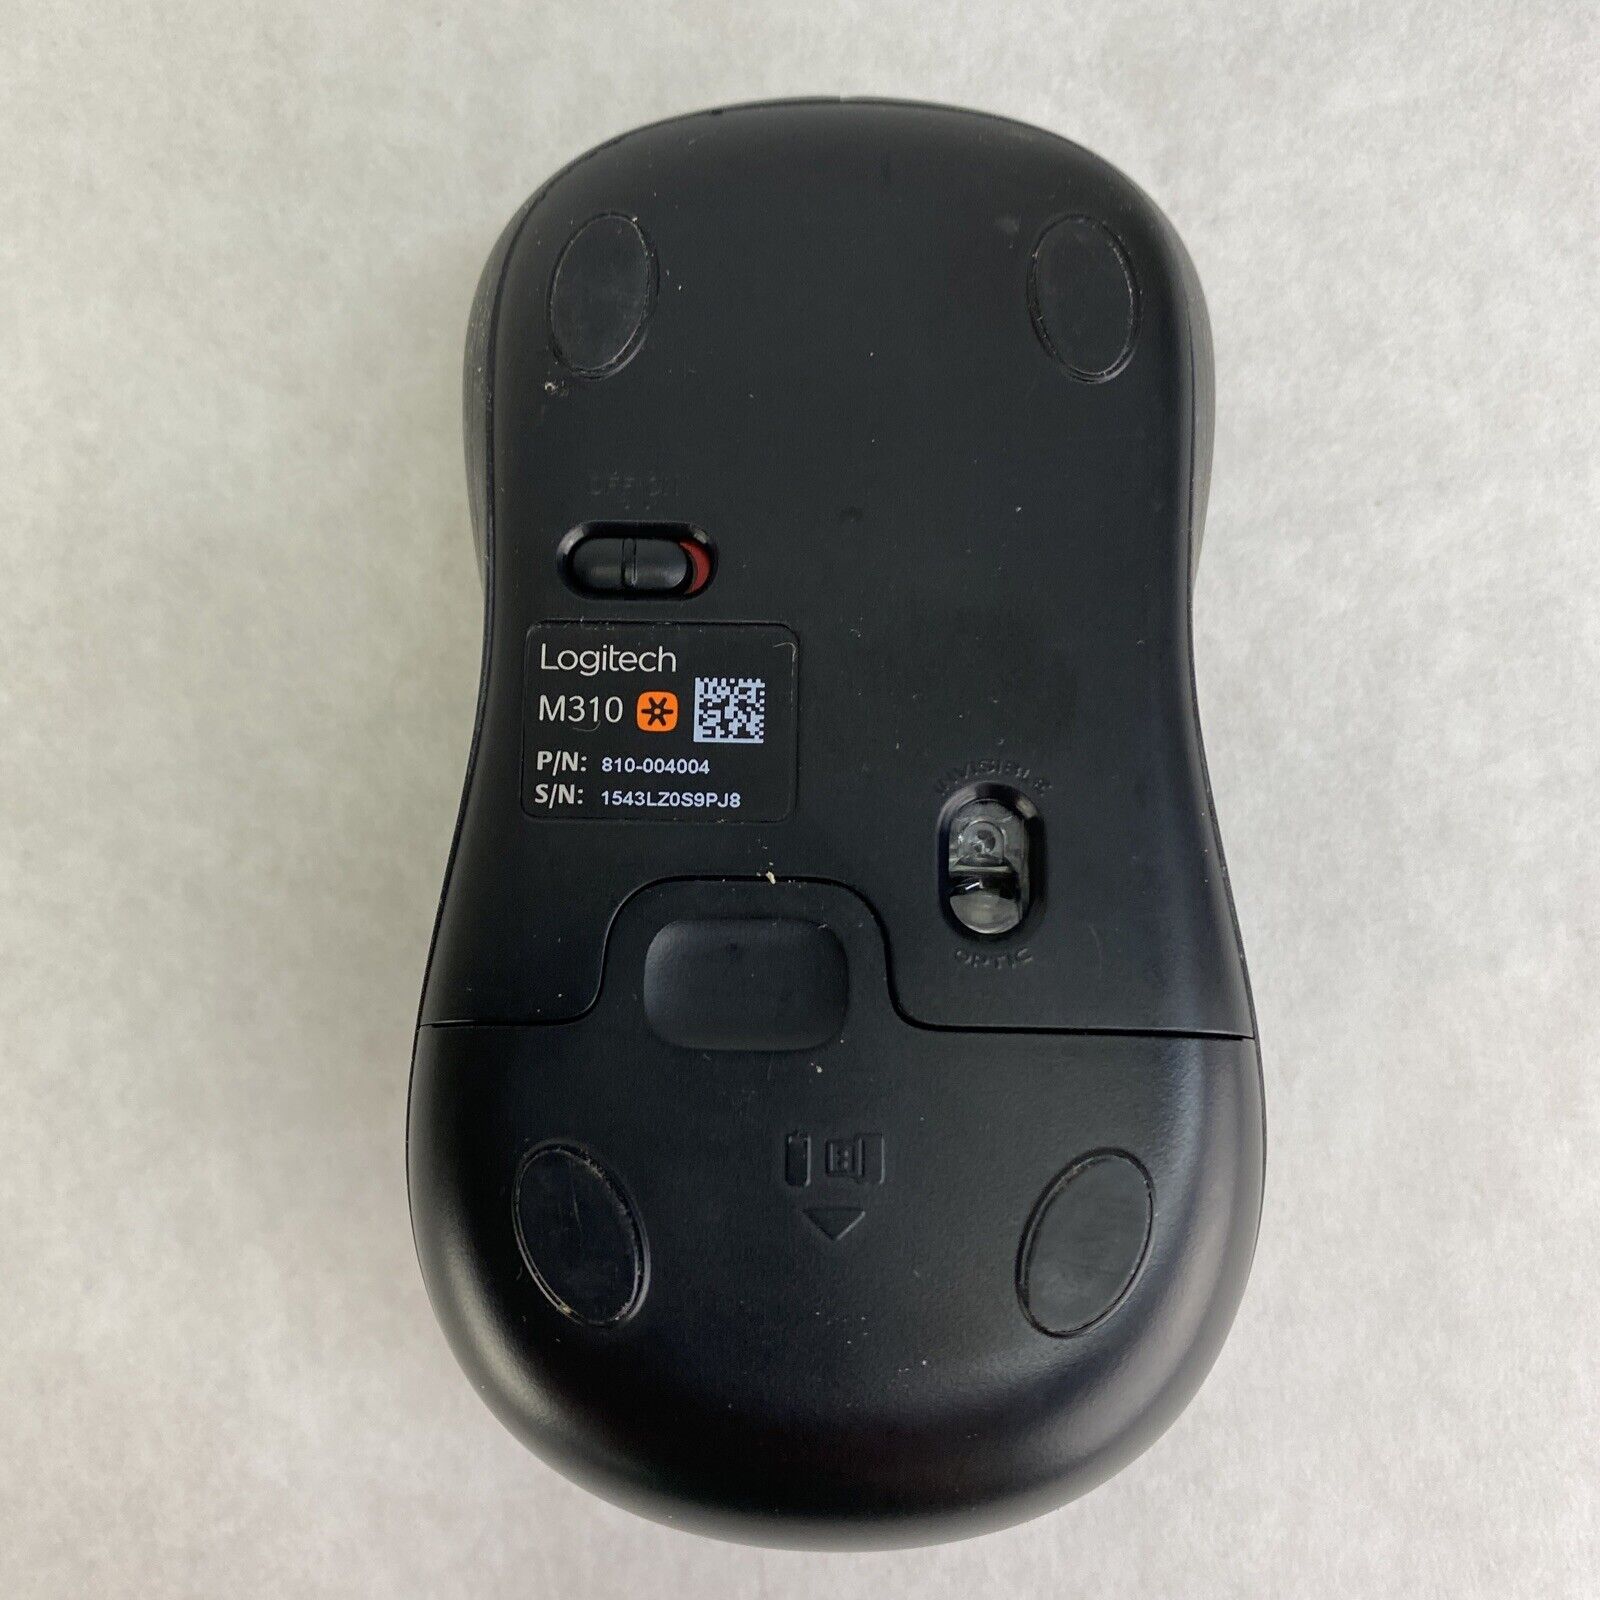 Logitech 810-004004 USB Wireless M310 Optical Mouse WITH Reciever DONGLE